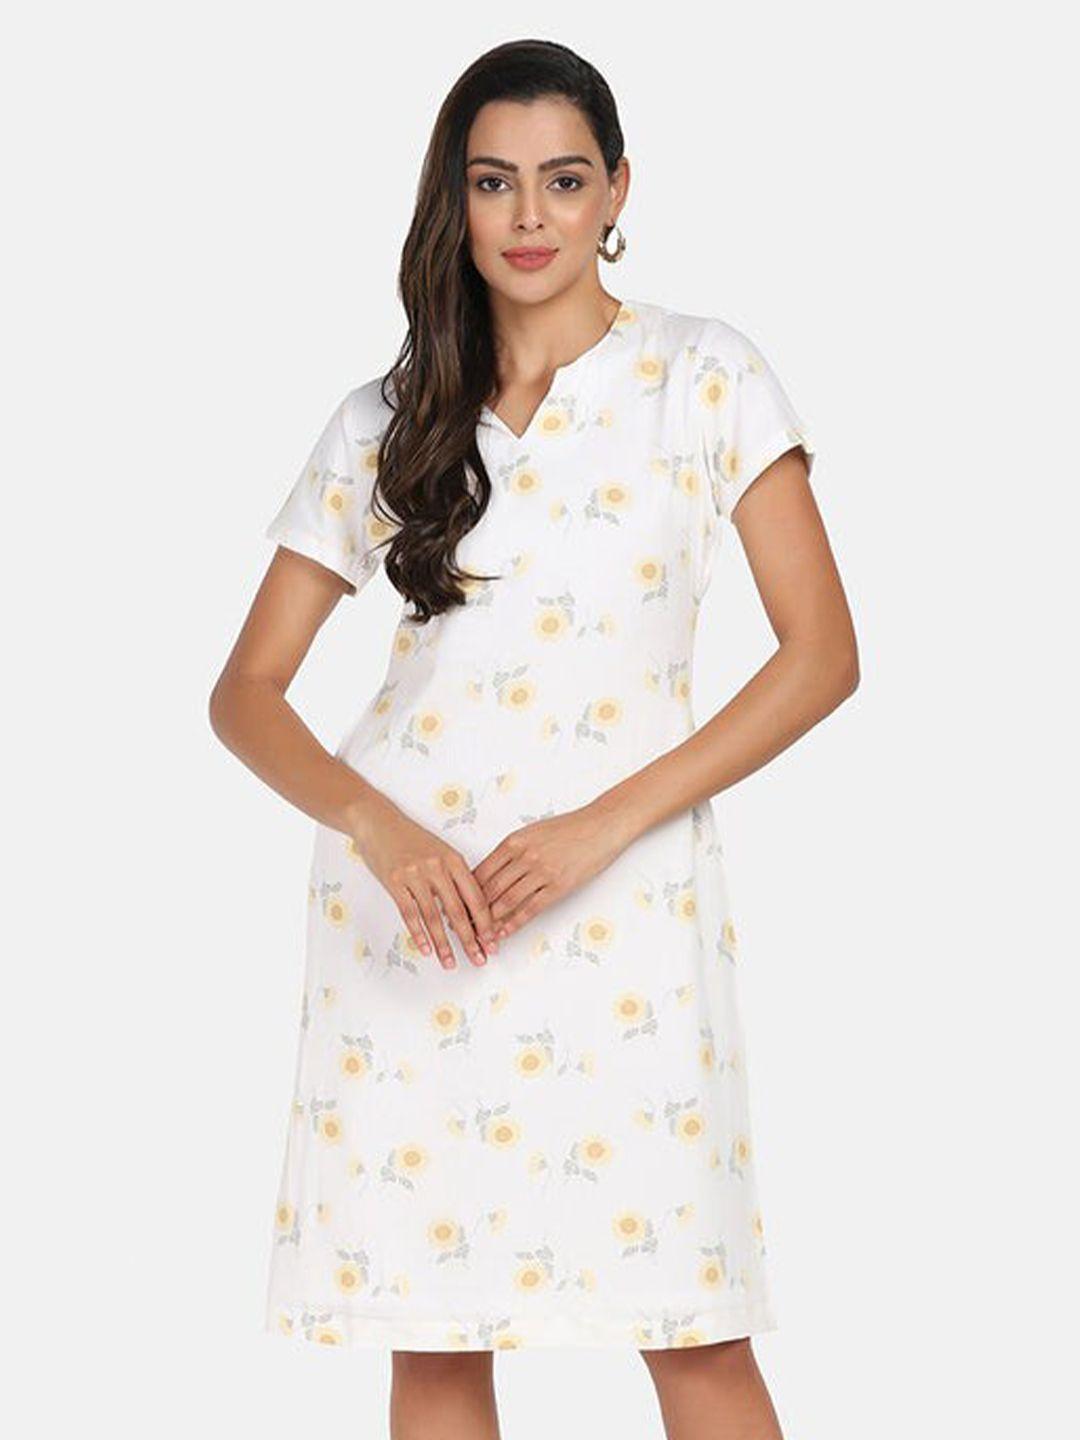 powersutra white & yellow floral a-line dress